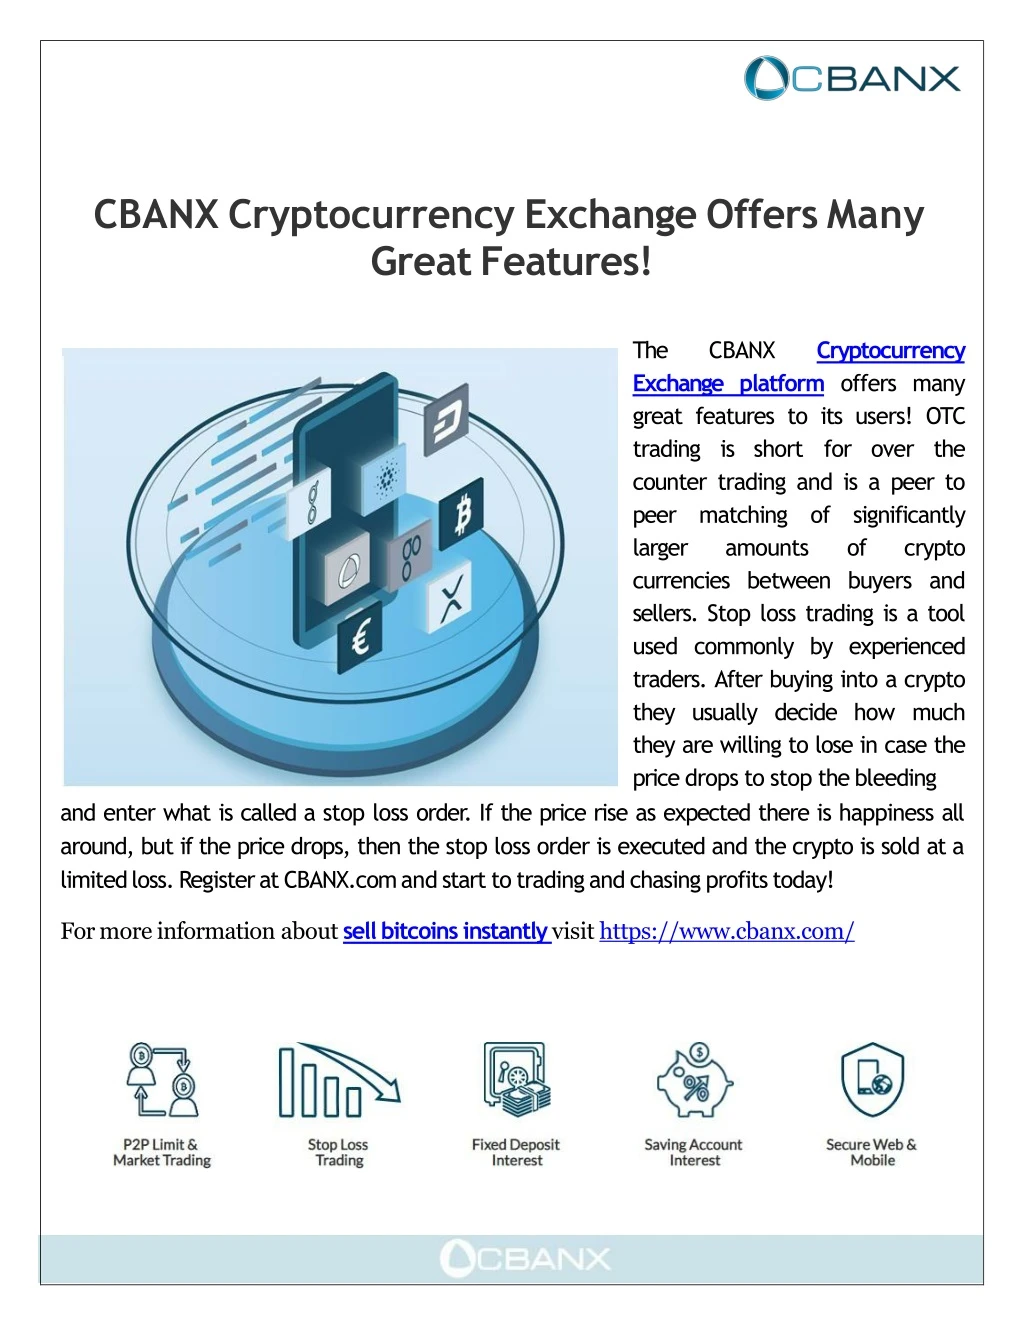 cbanx cryptocurrency exchange offers many great features